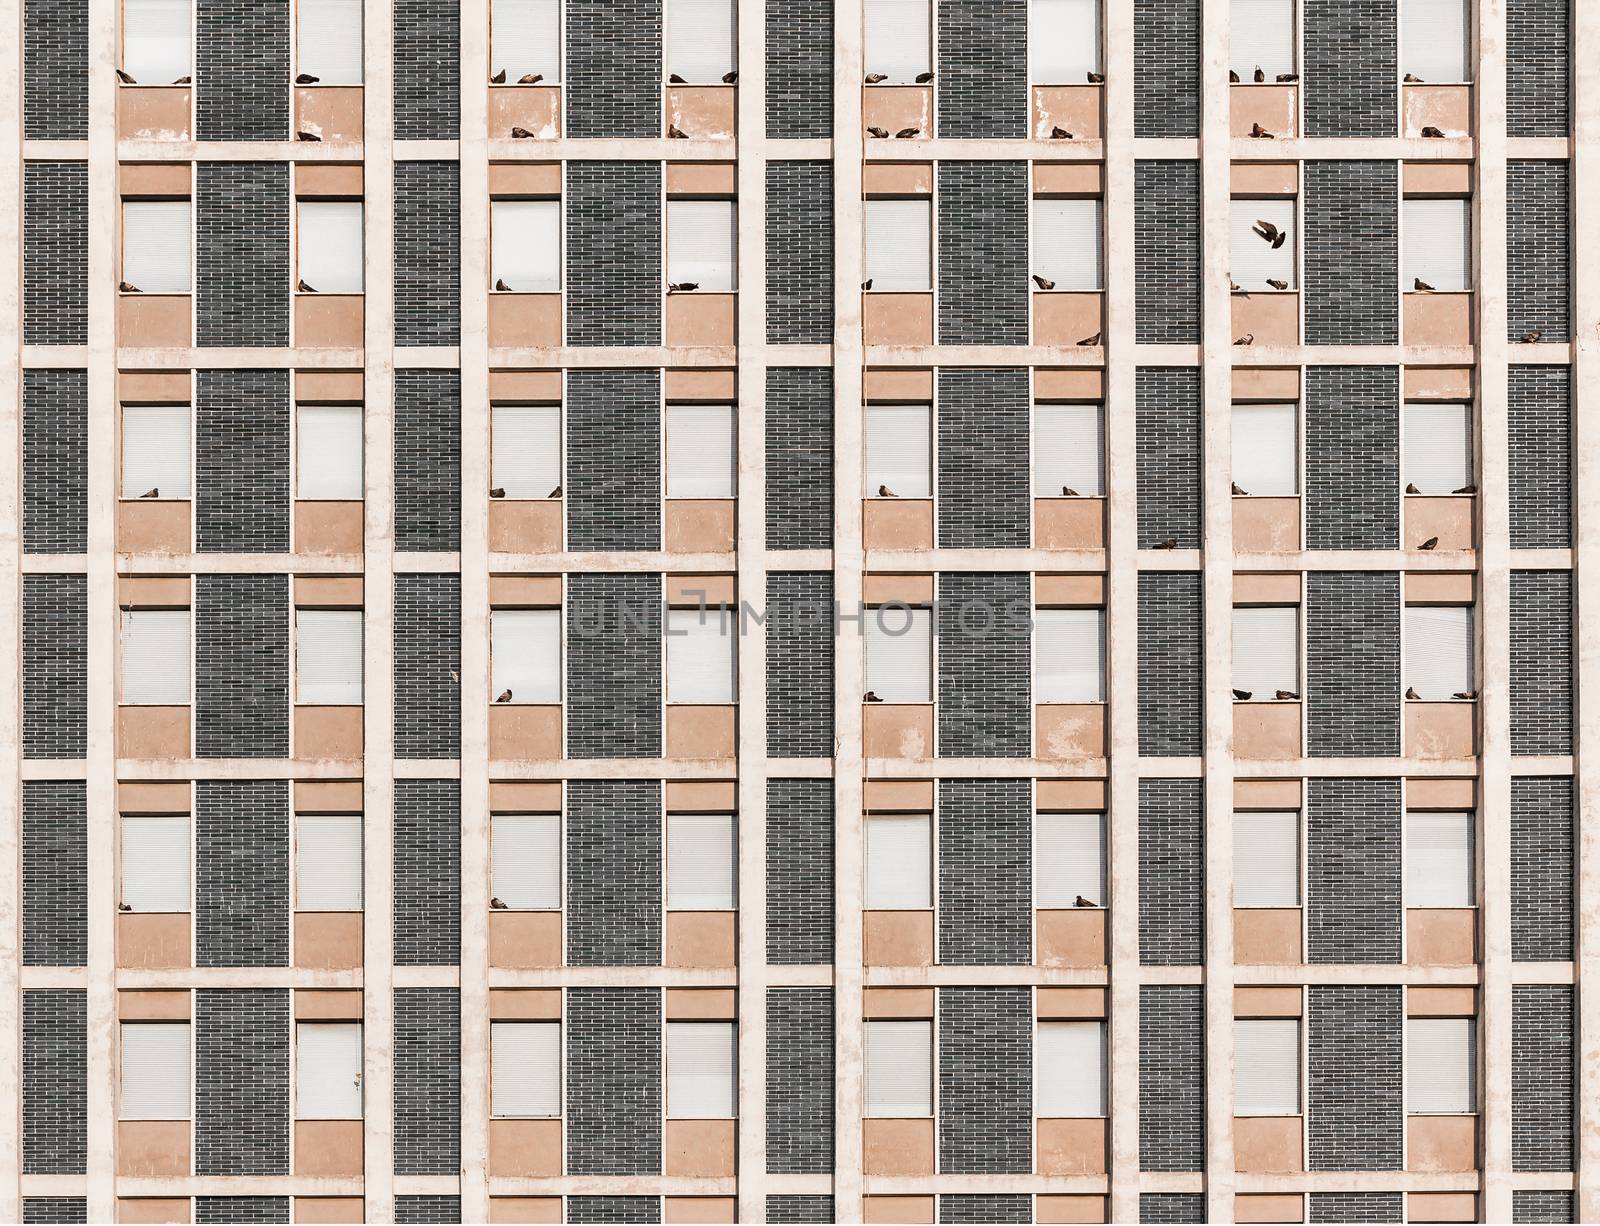 Background of vintage residential building windows invaded by pigeon